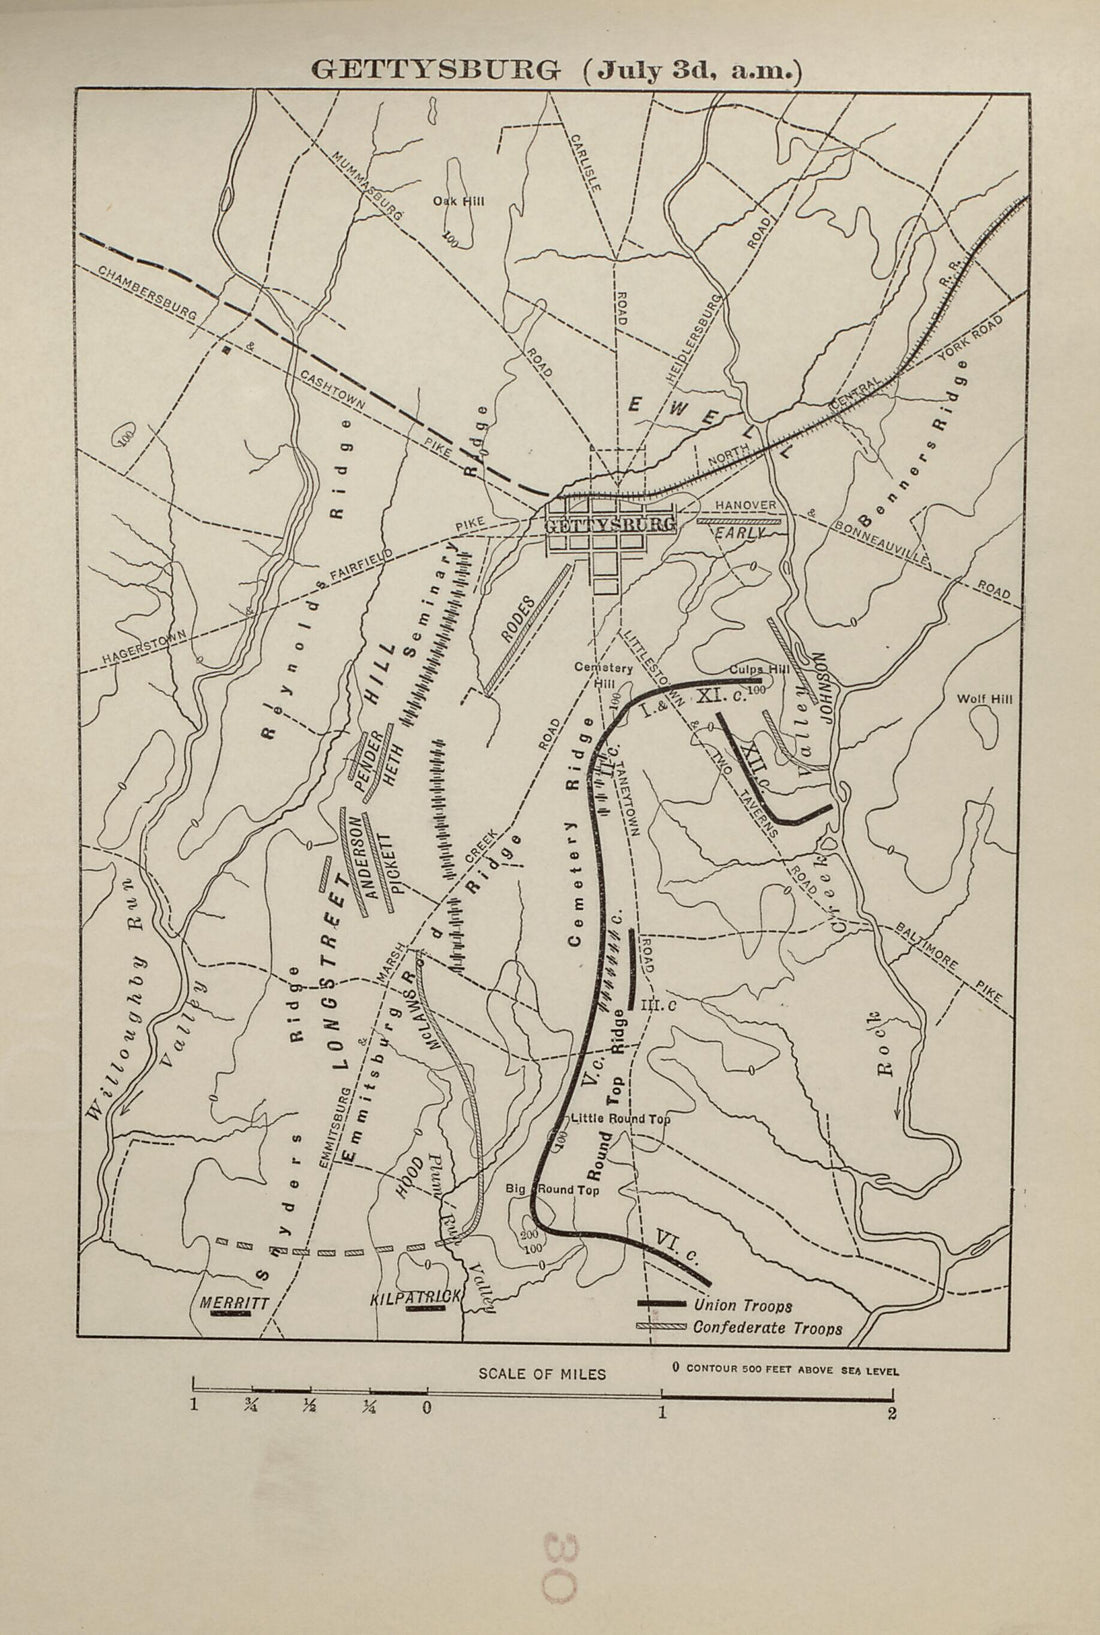 This old map of Gettysburg (July 3d A.m.) from American Civil War Atlas from 1914 was created by G. J. (Gustav Joseph) Fiebeger in 1914